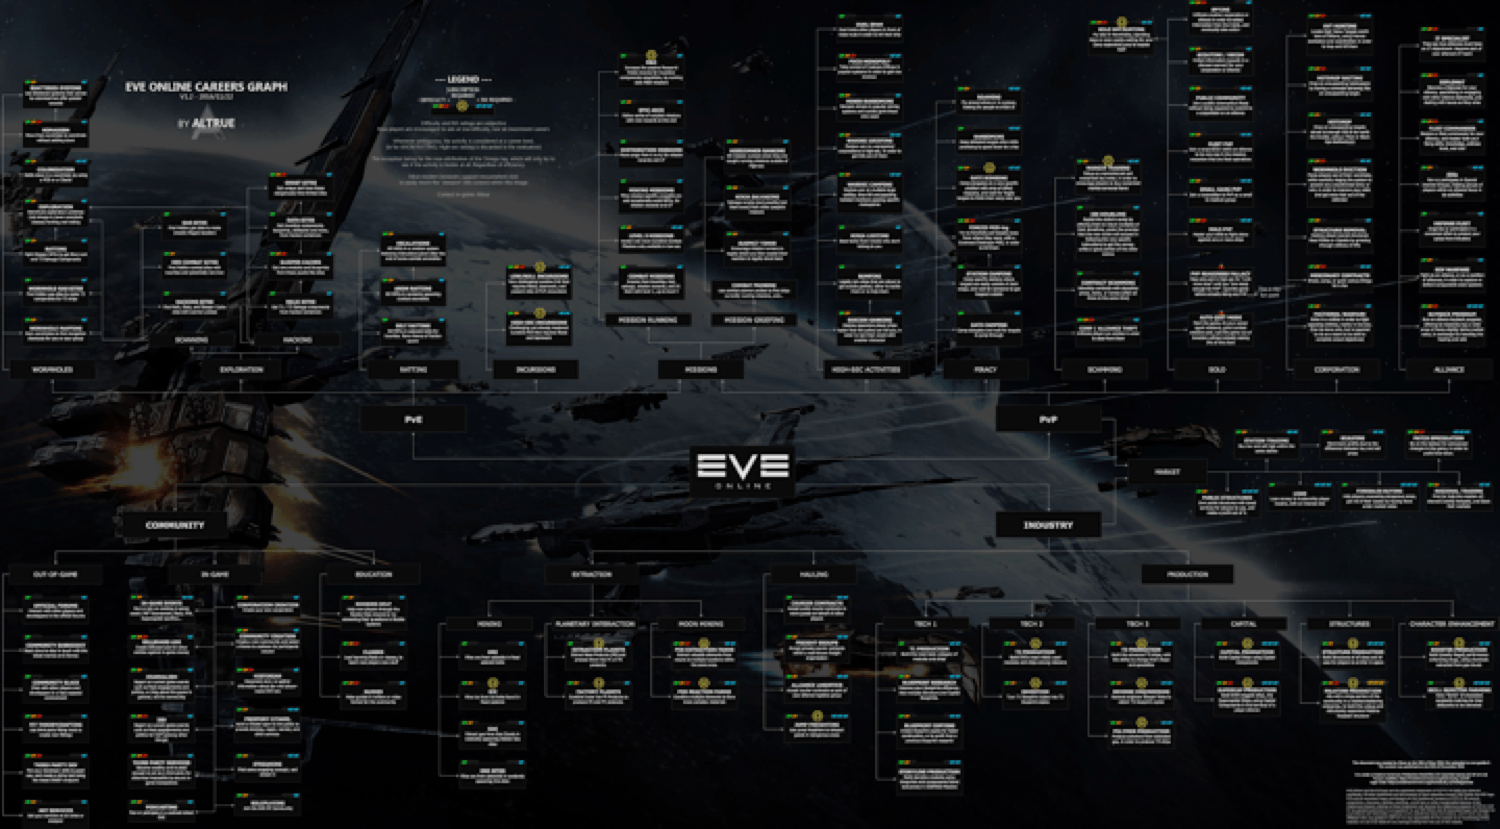 Our Review for Eve Online